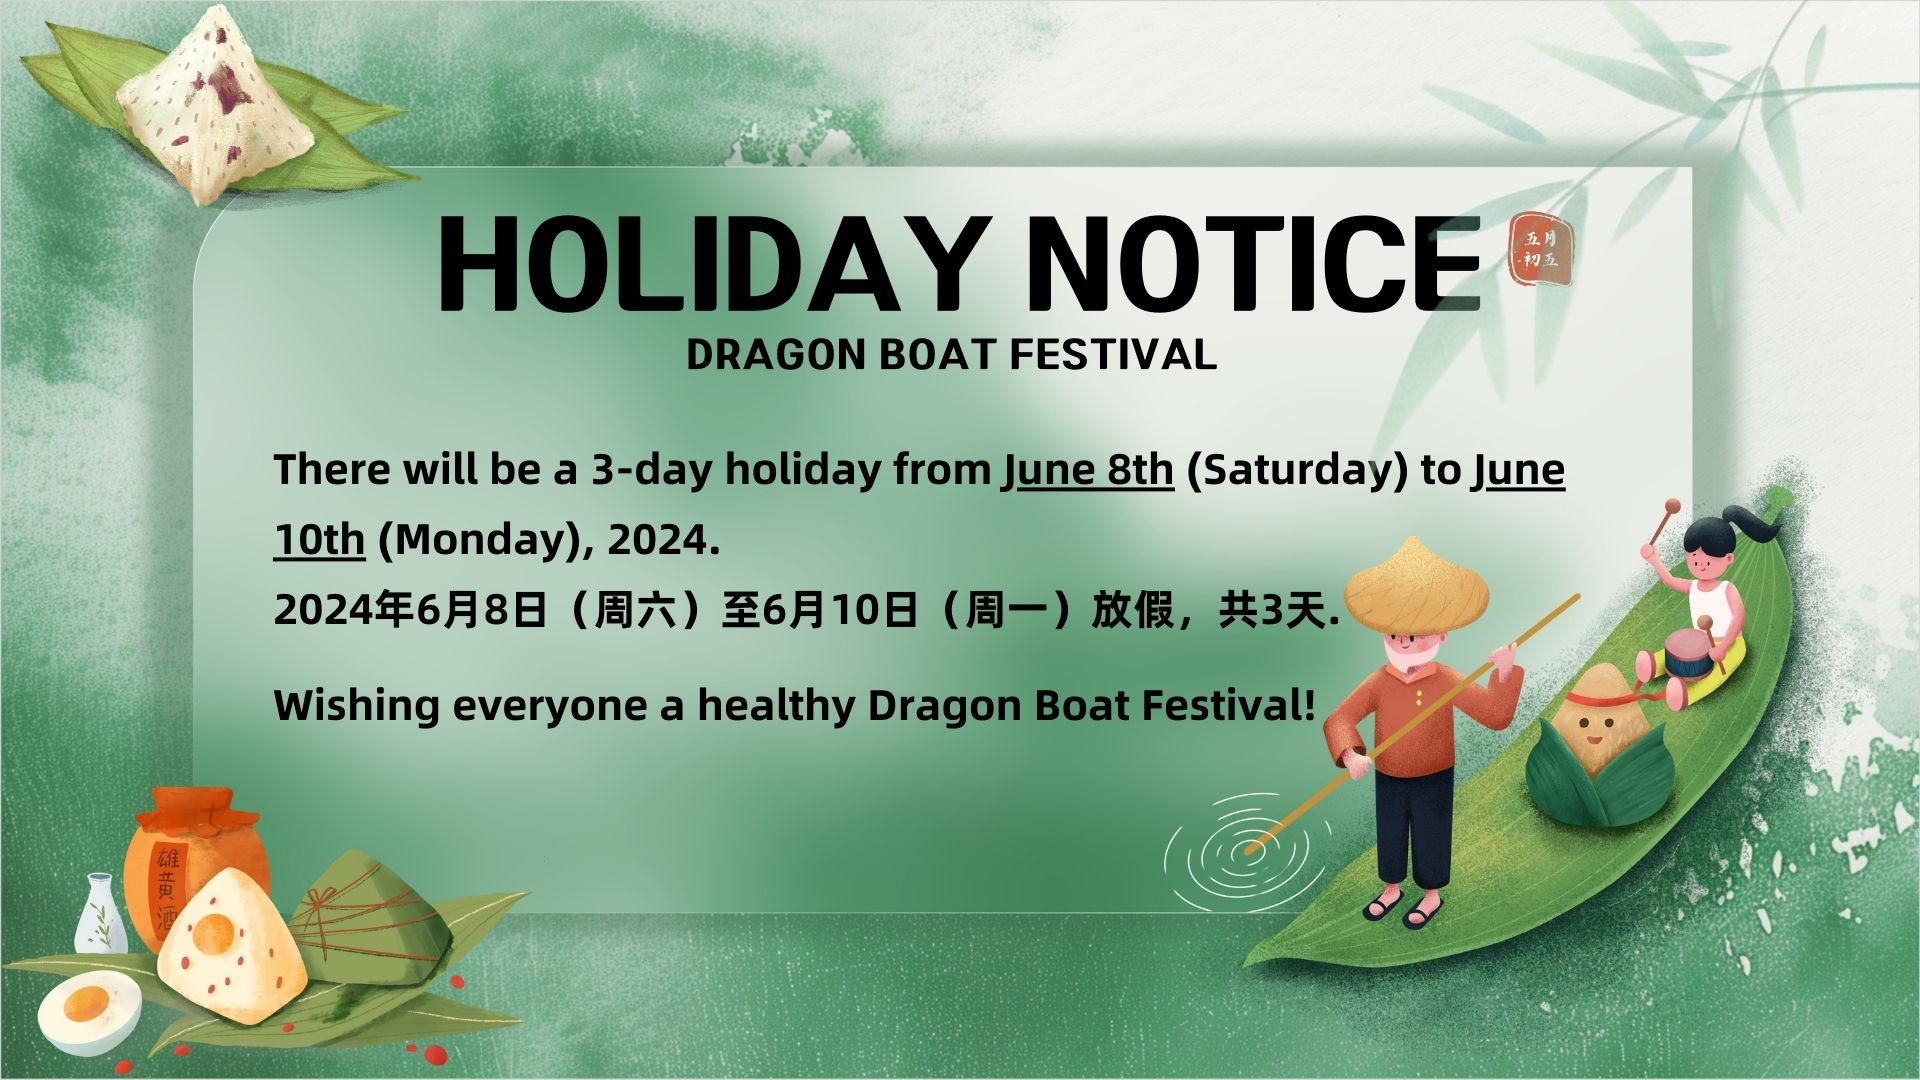 Notice of Dragon Boat Festival holiday